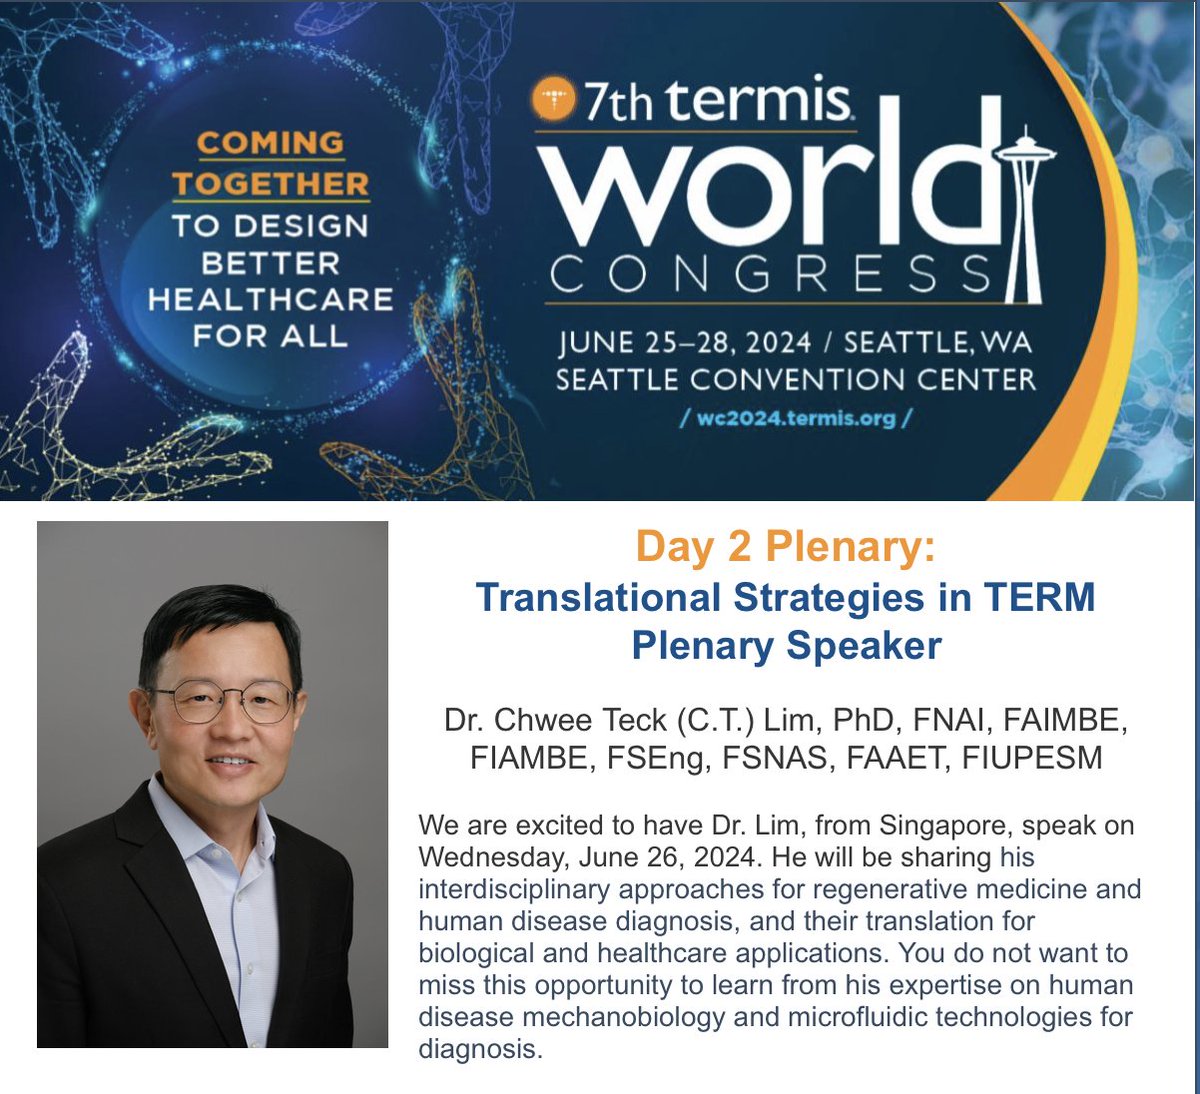 Excited to announce Dr. Chwee Teck Lim as our #TERMIS2024 World Congress Plenary Speaker on Translational Strategies in TERM. Keep up to date on program updates wc2024.termis.org @TERMISAM @EuTermis @ApTermis @SyisEu @SyisTermis